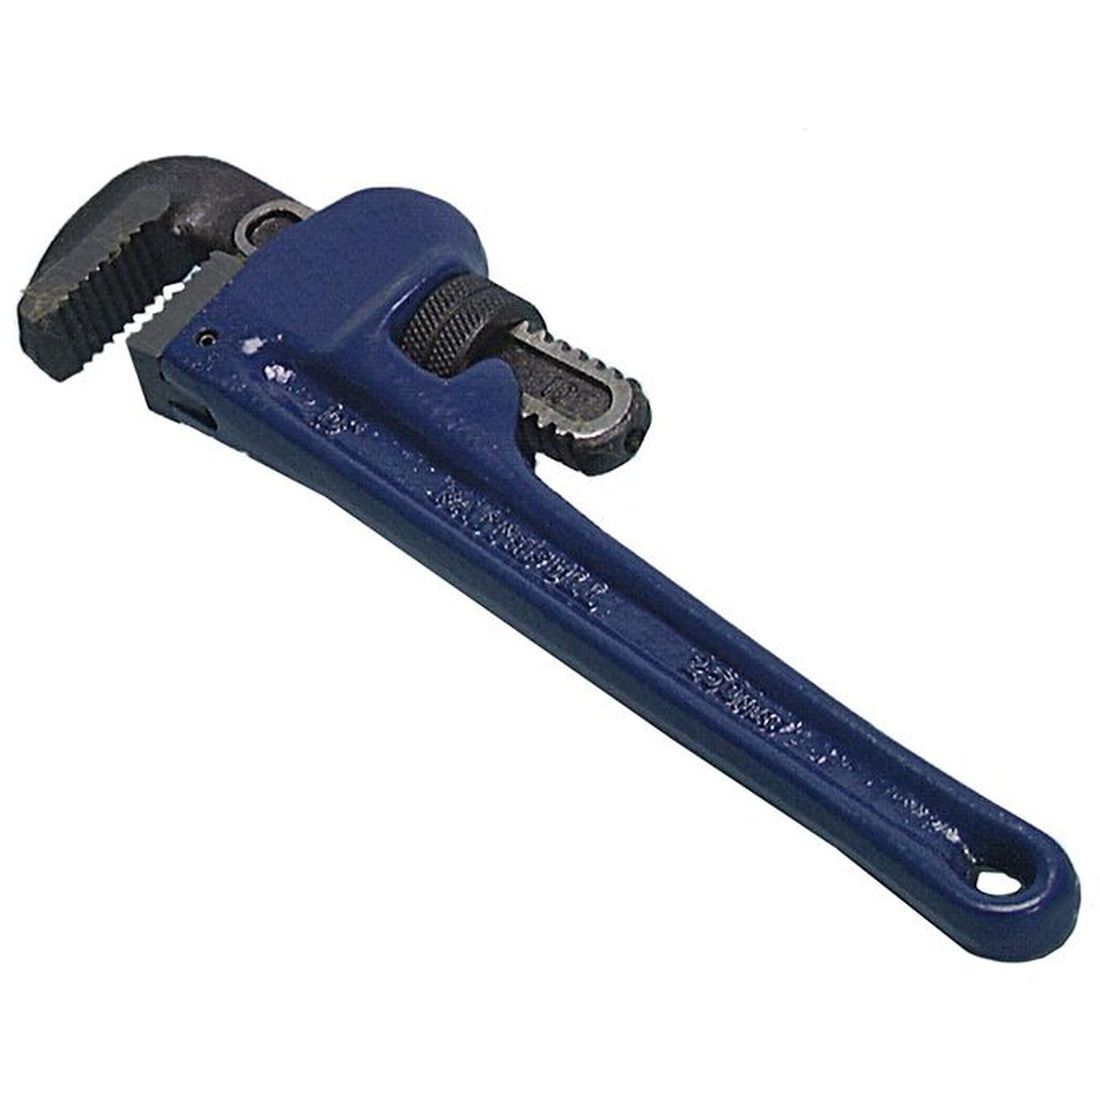 Faithfull Leader Pattern Pipe Wrench 600mm (24in)                                         